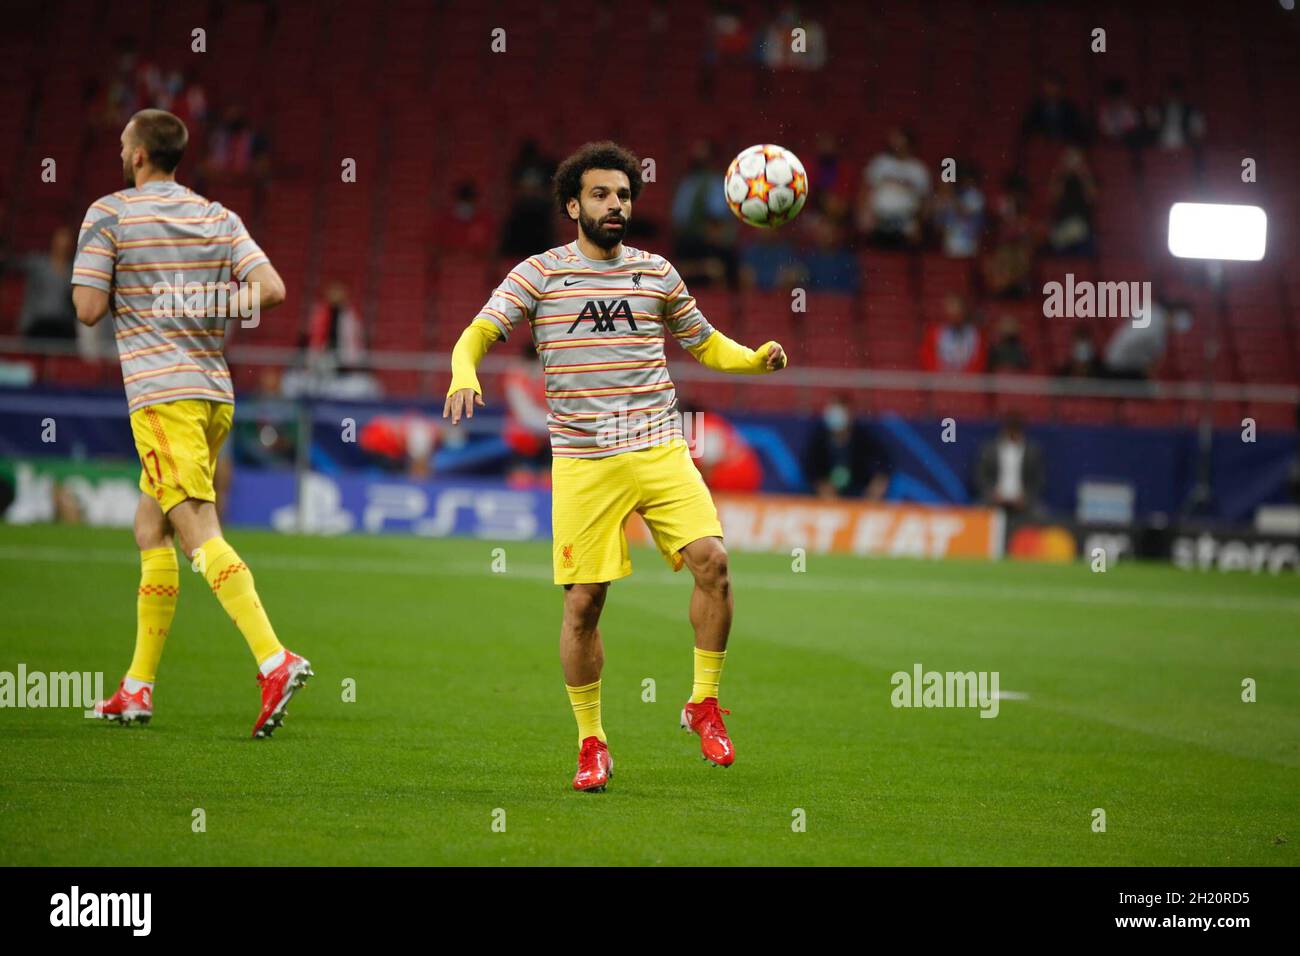 Madrid, Spain. 19th Oct, 2021. Mohamed Salah from Liverpool FC, during warming-up the UEFA Champions League Group stage agains Atletico de Madrid at the Wanda Metropolitano stadium. (Photo by: Ivan Abanades Medina Credit: CORDON PRESS/Alamy Live News Stock Photo